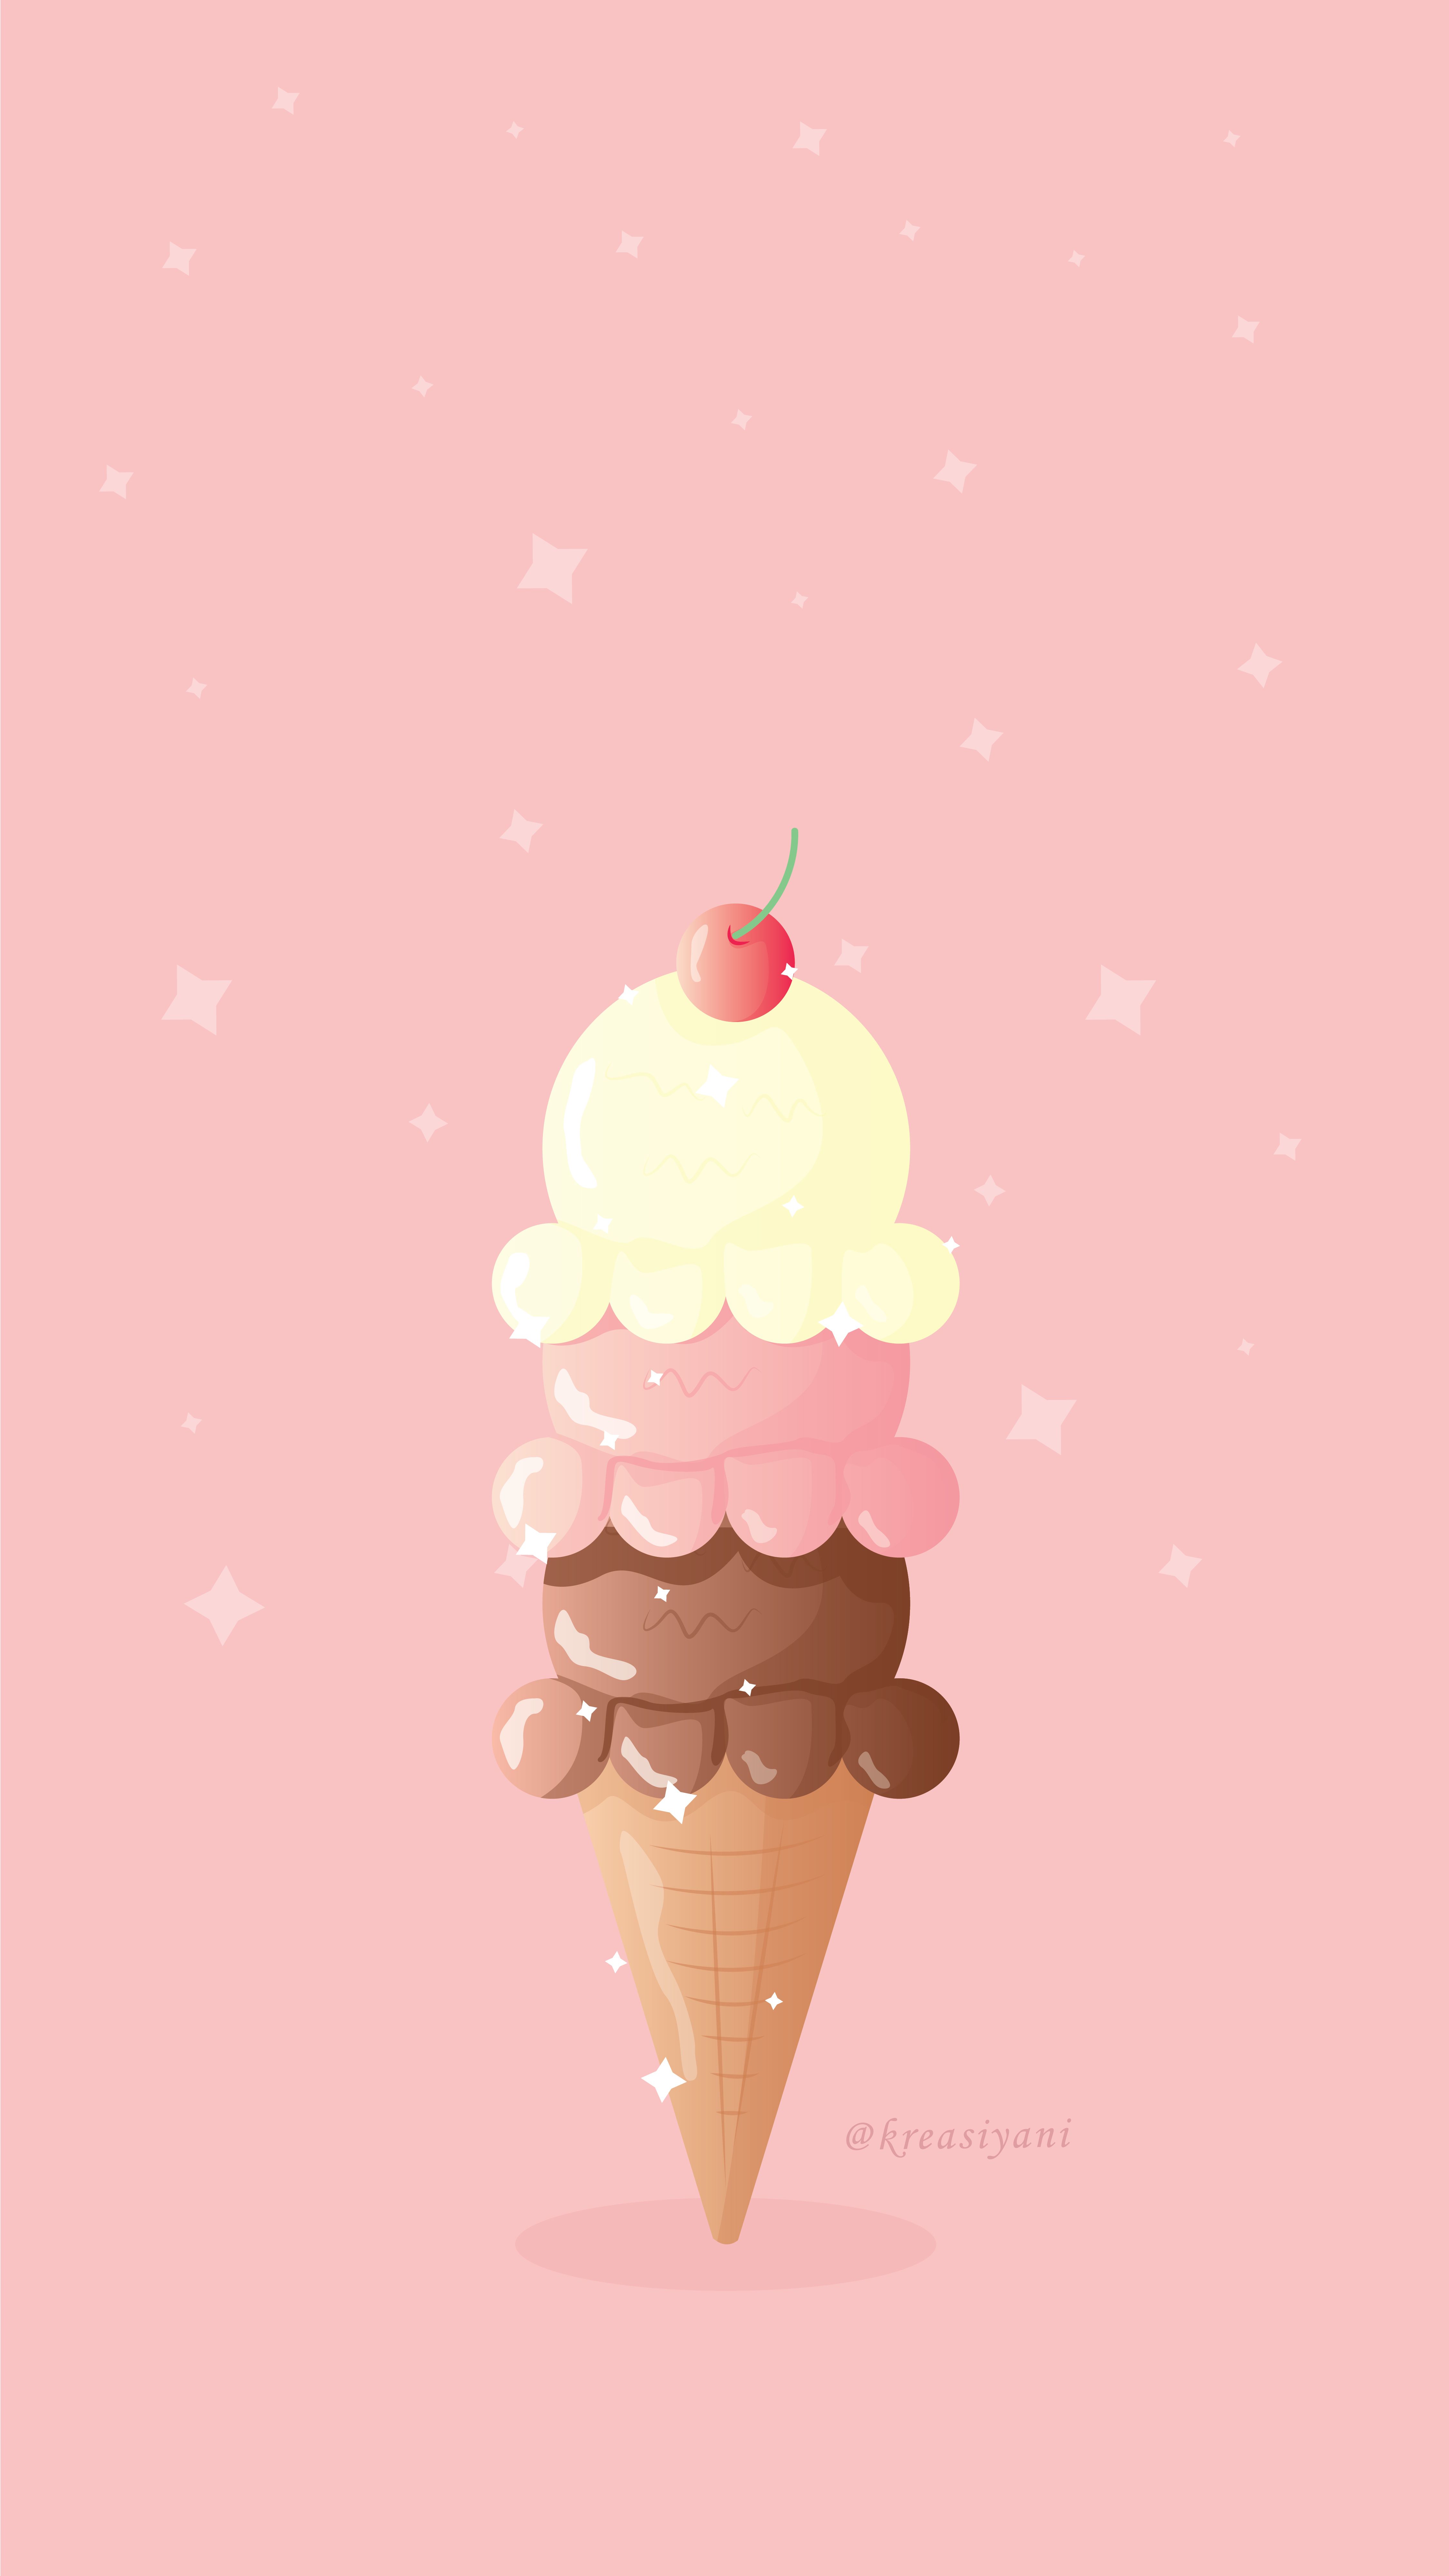 IPhone wallpaper of a delicious ice cream cone with three scoops of ice cream and a cherry on top. - Ice cream